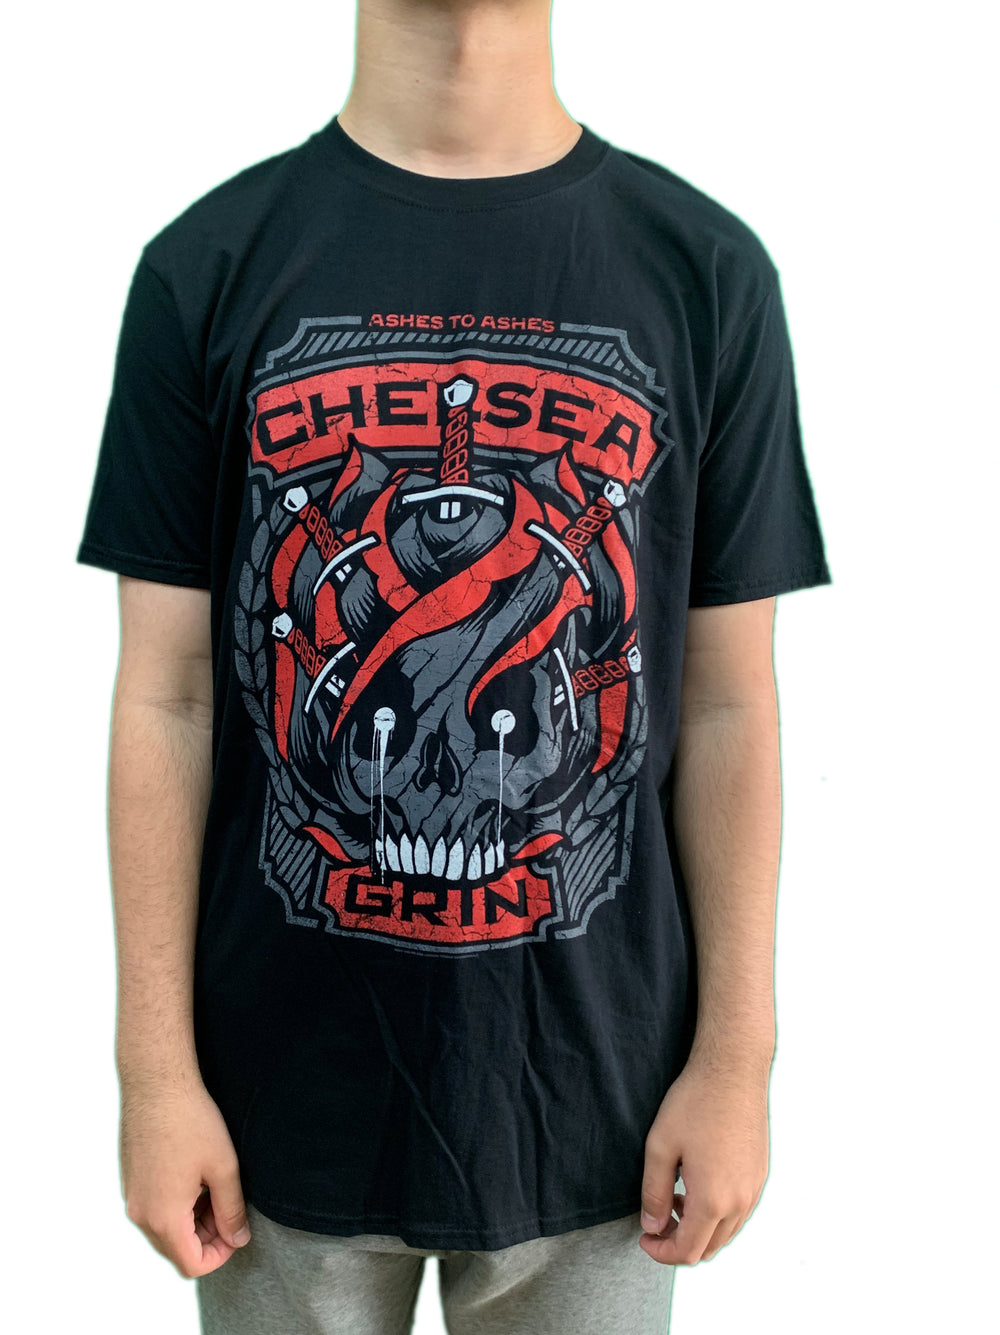 Chelsea Grin Ashes To Ashes Unisex Official Tee Shirt Brand New Various Sizes Rock Metal